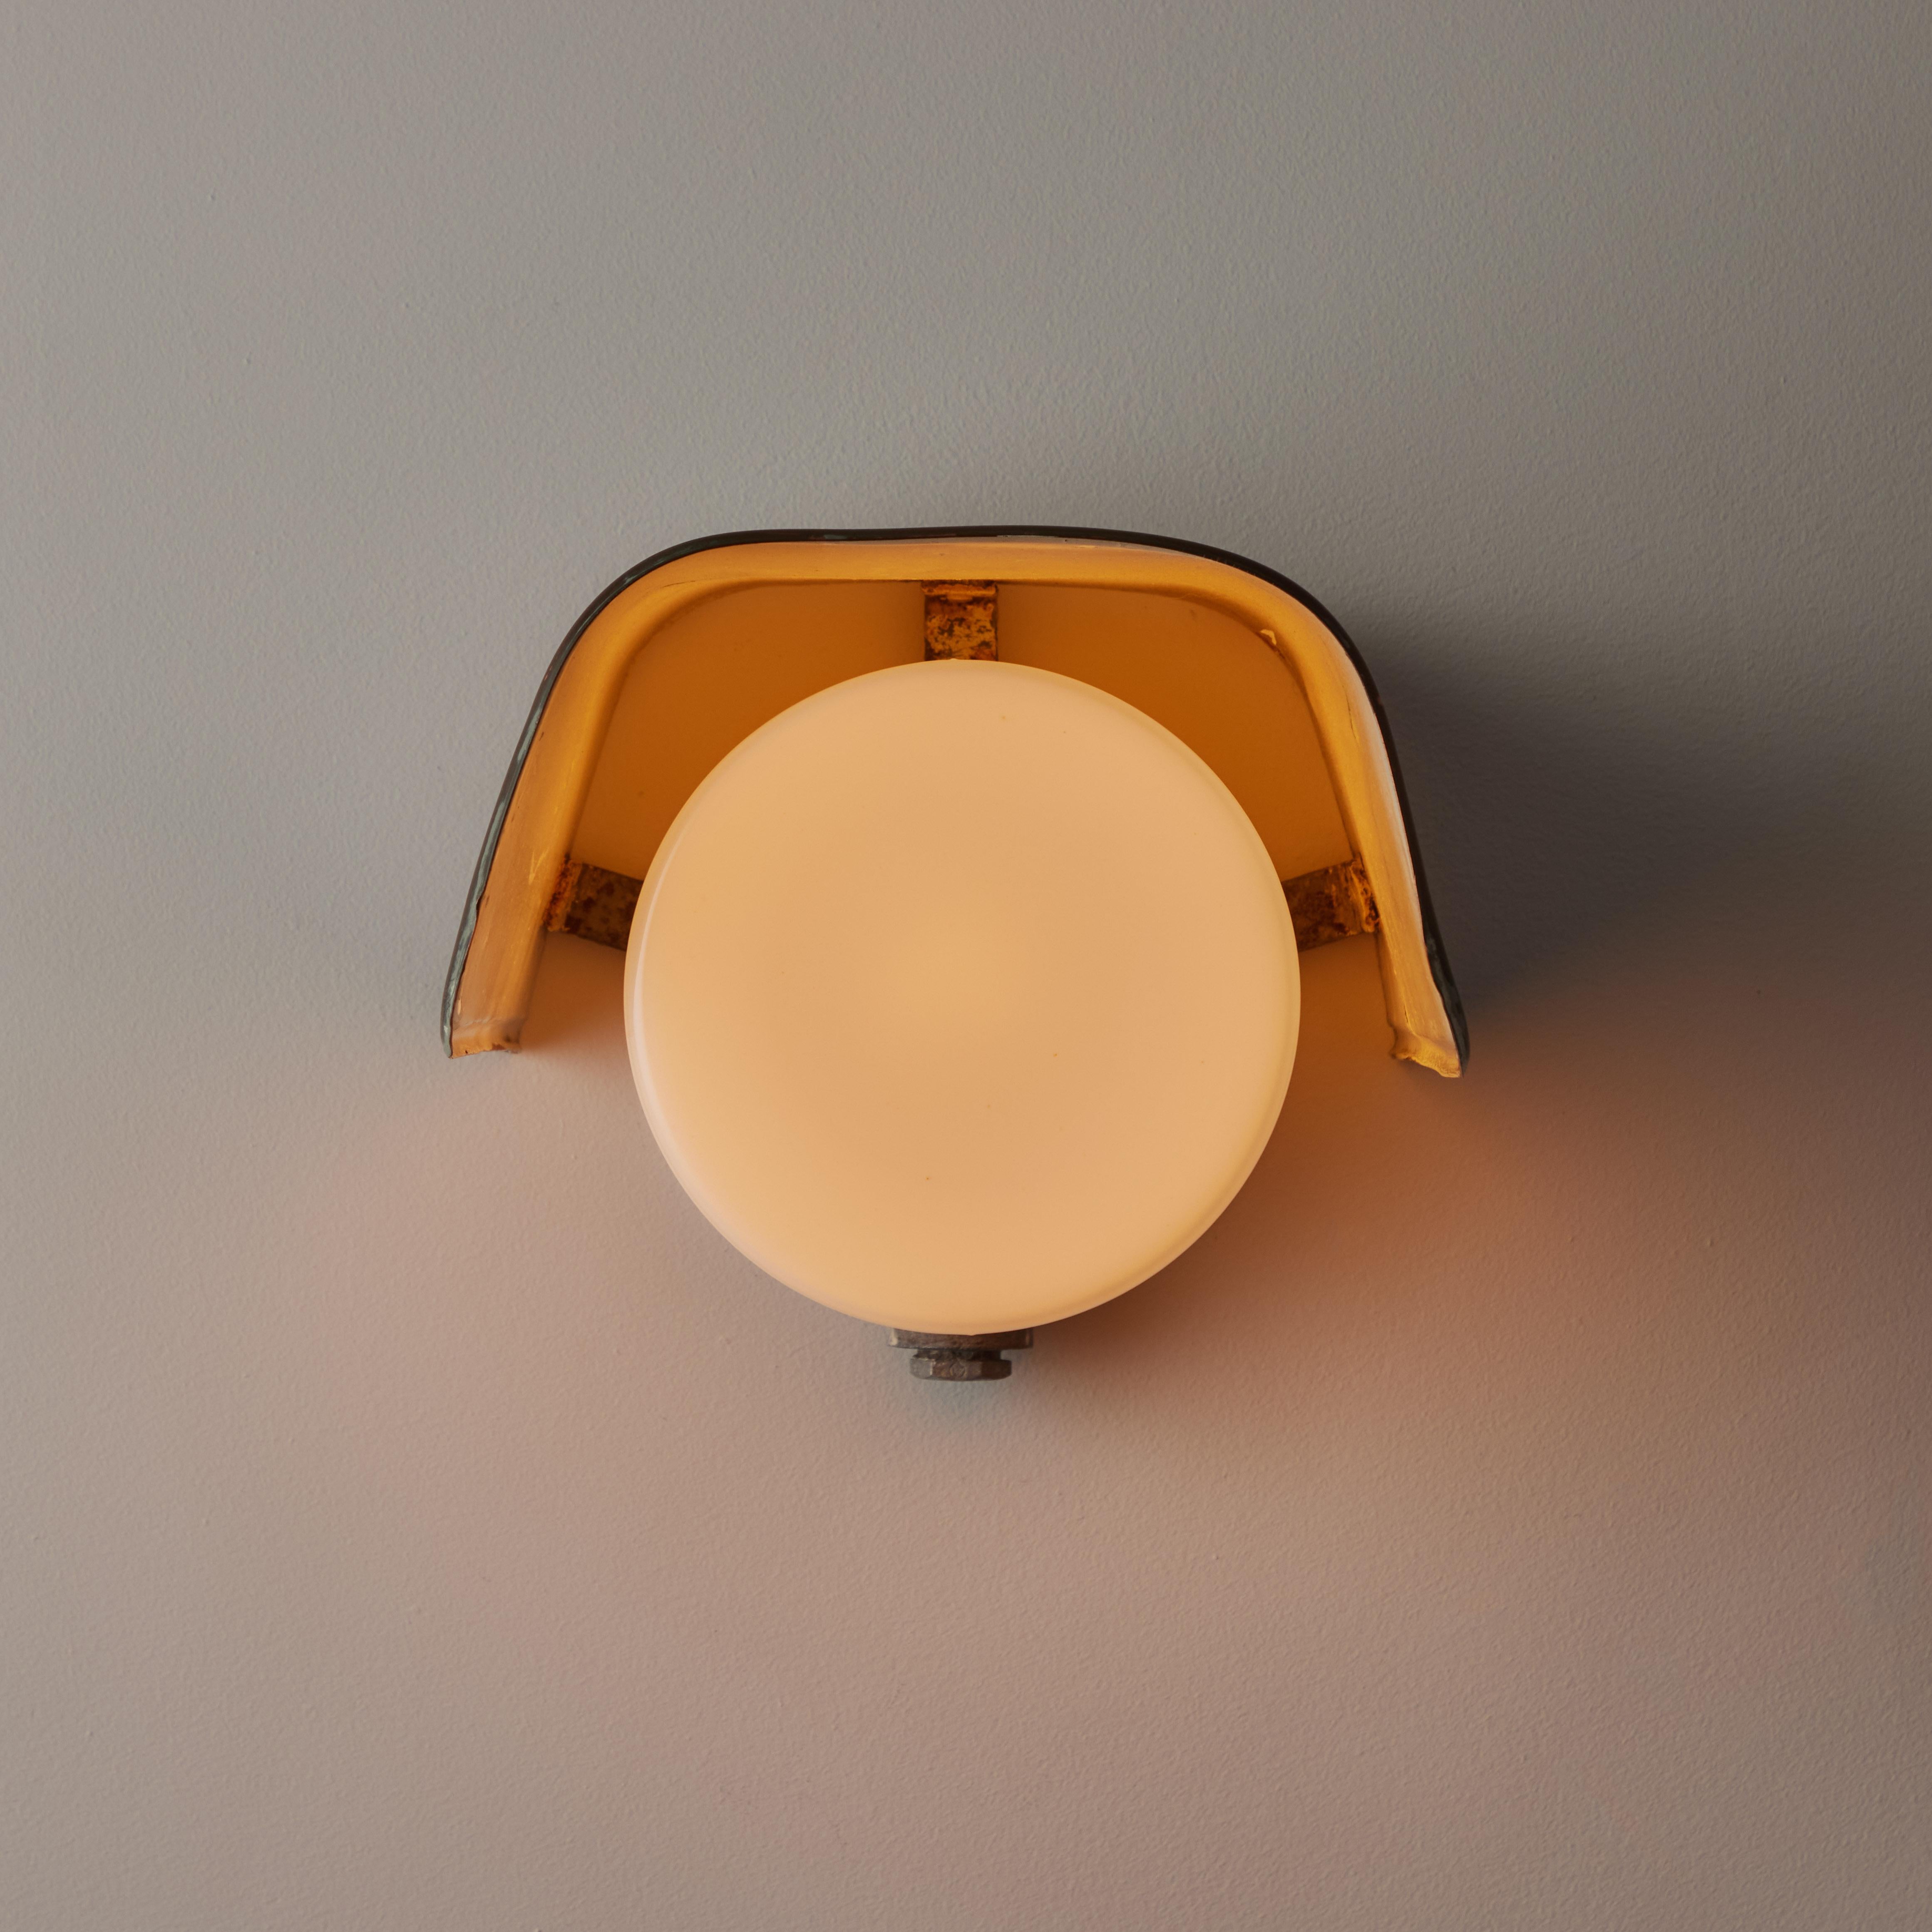 An Outdoor wall light by Paavo Tynell for Tato Oy. Designed and manufactured in Finland, circa 1950's. Copper, glass. Rewired for U.S. standards. We recommend one E26 60W maximum bulb. Bulb is not included. Only one single is available.